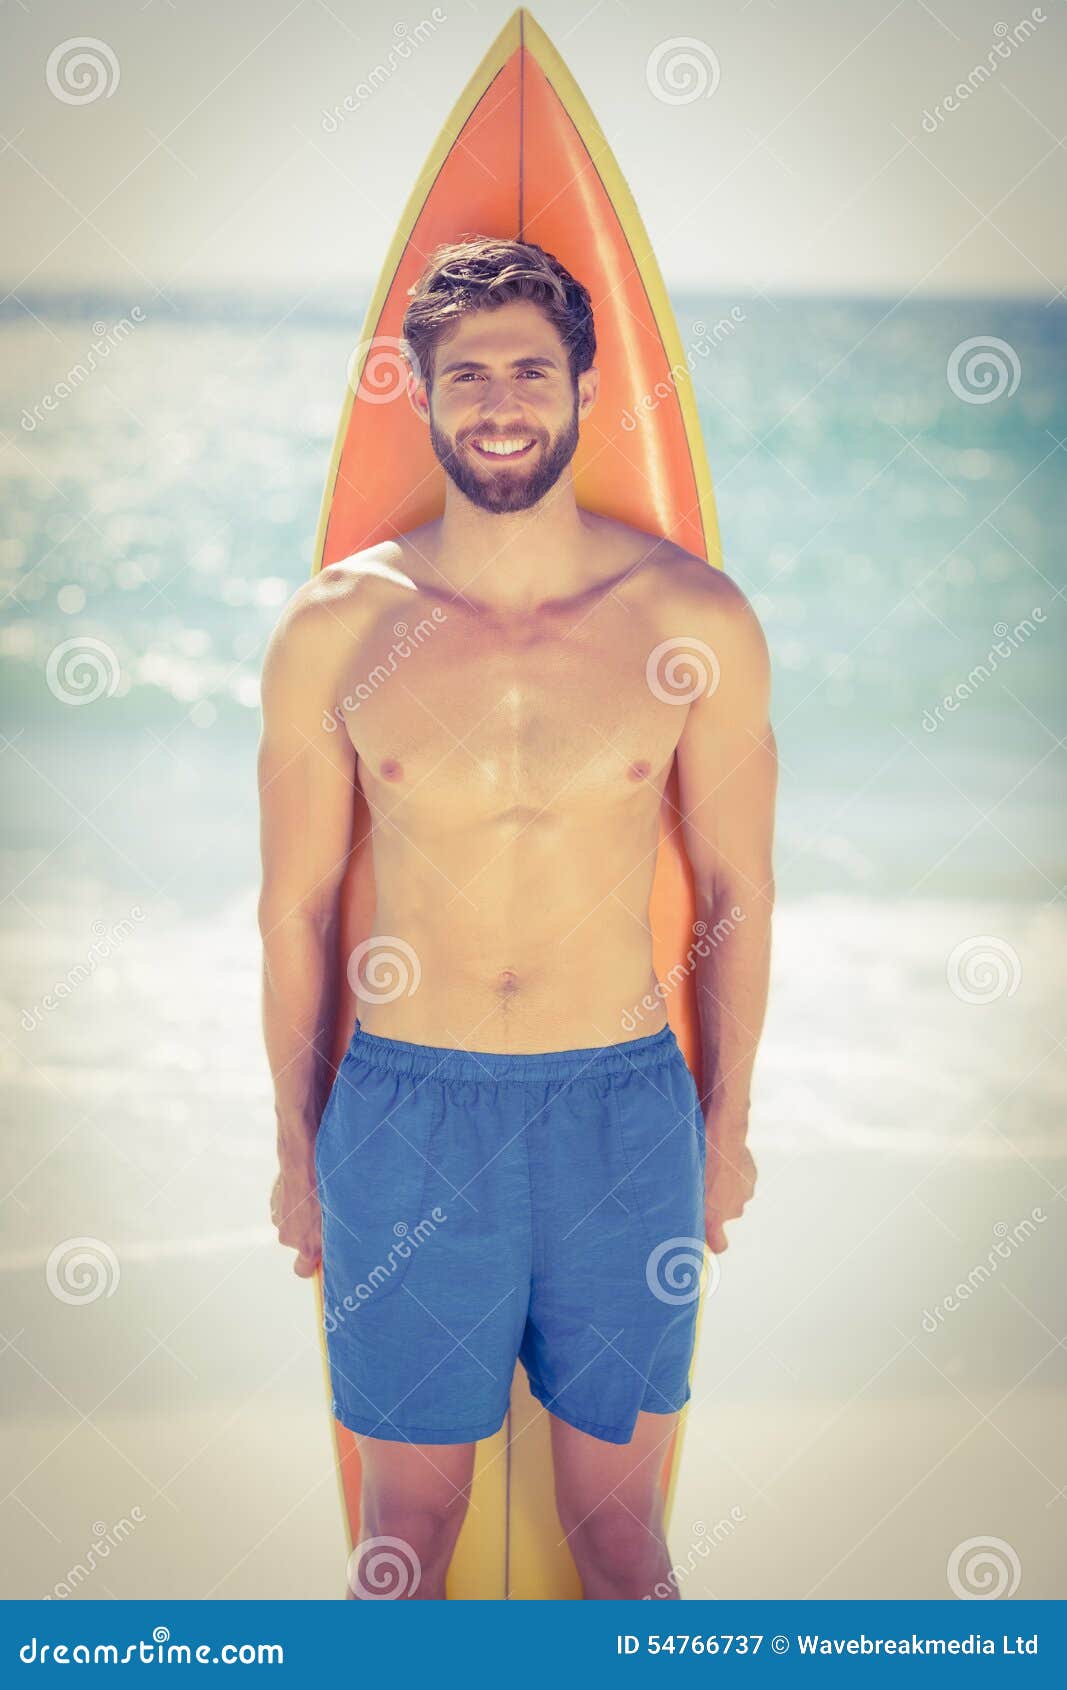 Handsome Surfer Man Standing in Front of His Surfboard Stock Image ...